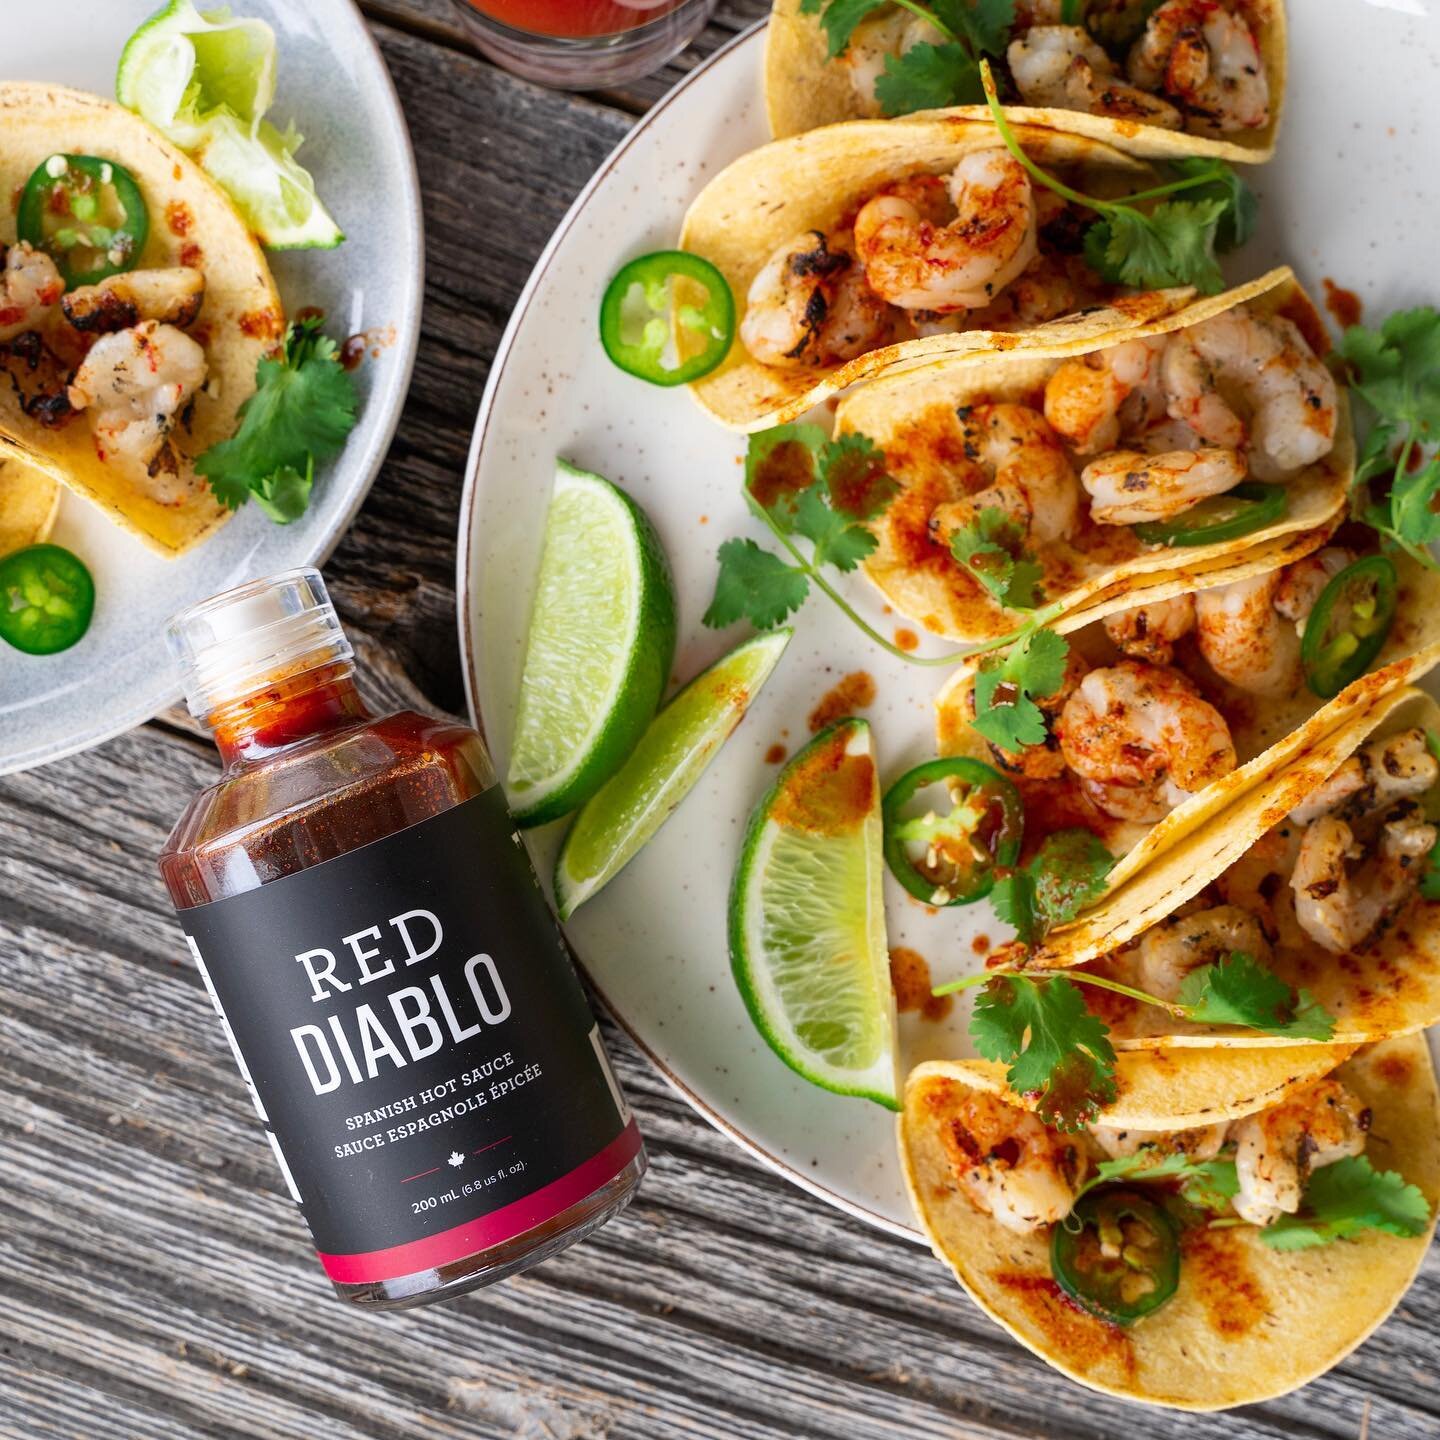 You can never go wrong with Red Diablo... Ever. 😉 Just one or two tablespoons is enough to instantly transform any meal! These Red Diablo shrimp tacos are simply unparalleled 🤤🤤🌮🦐

Try some today! Link in bio. 

#kappafoods #hotsauce #reddiablo 